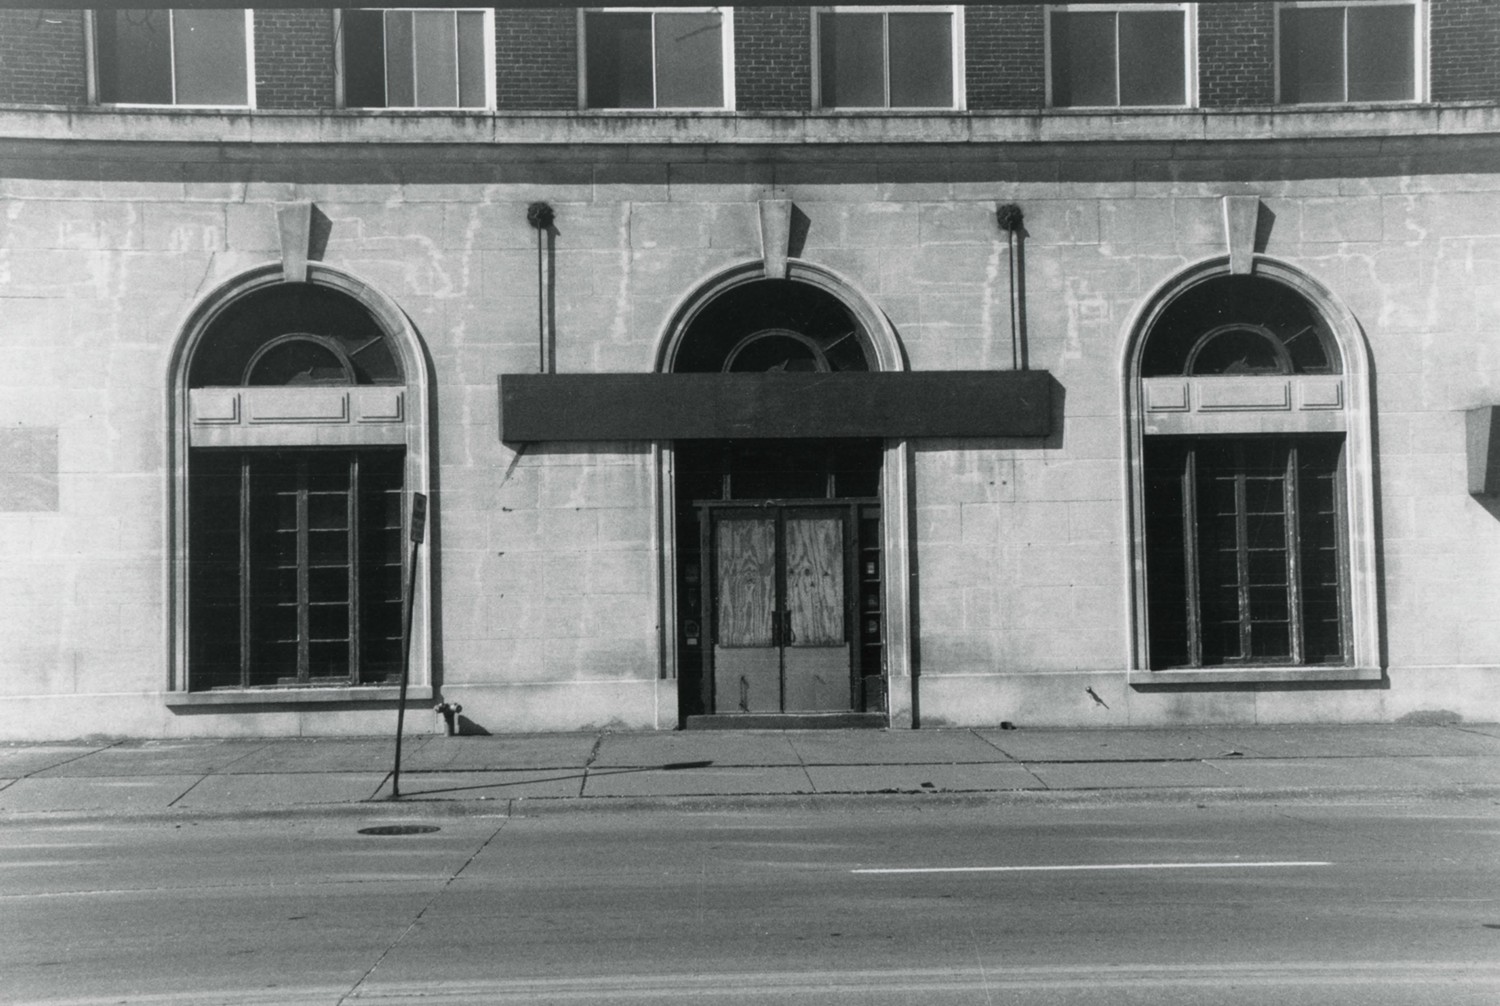 LeClaire Hotel, Moline Illinois Facade main entry and flanking windows (1993)